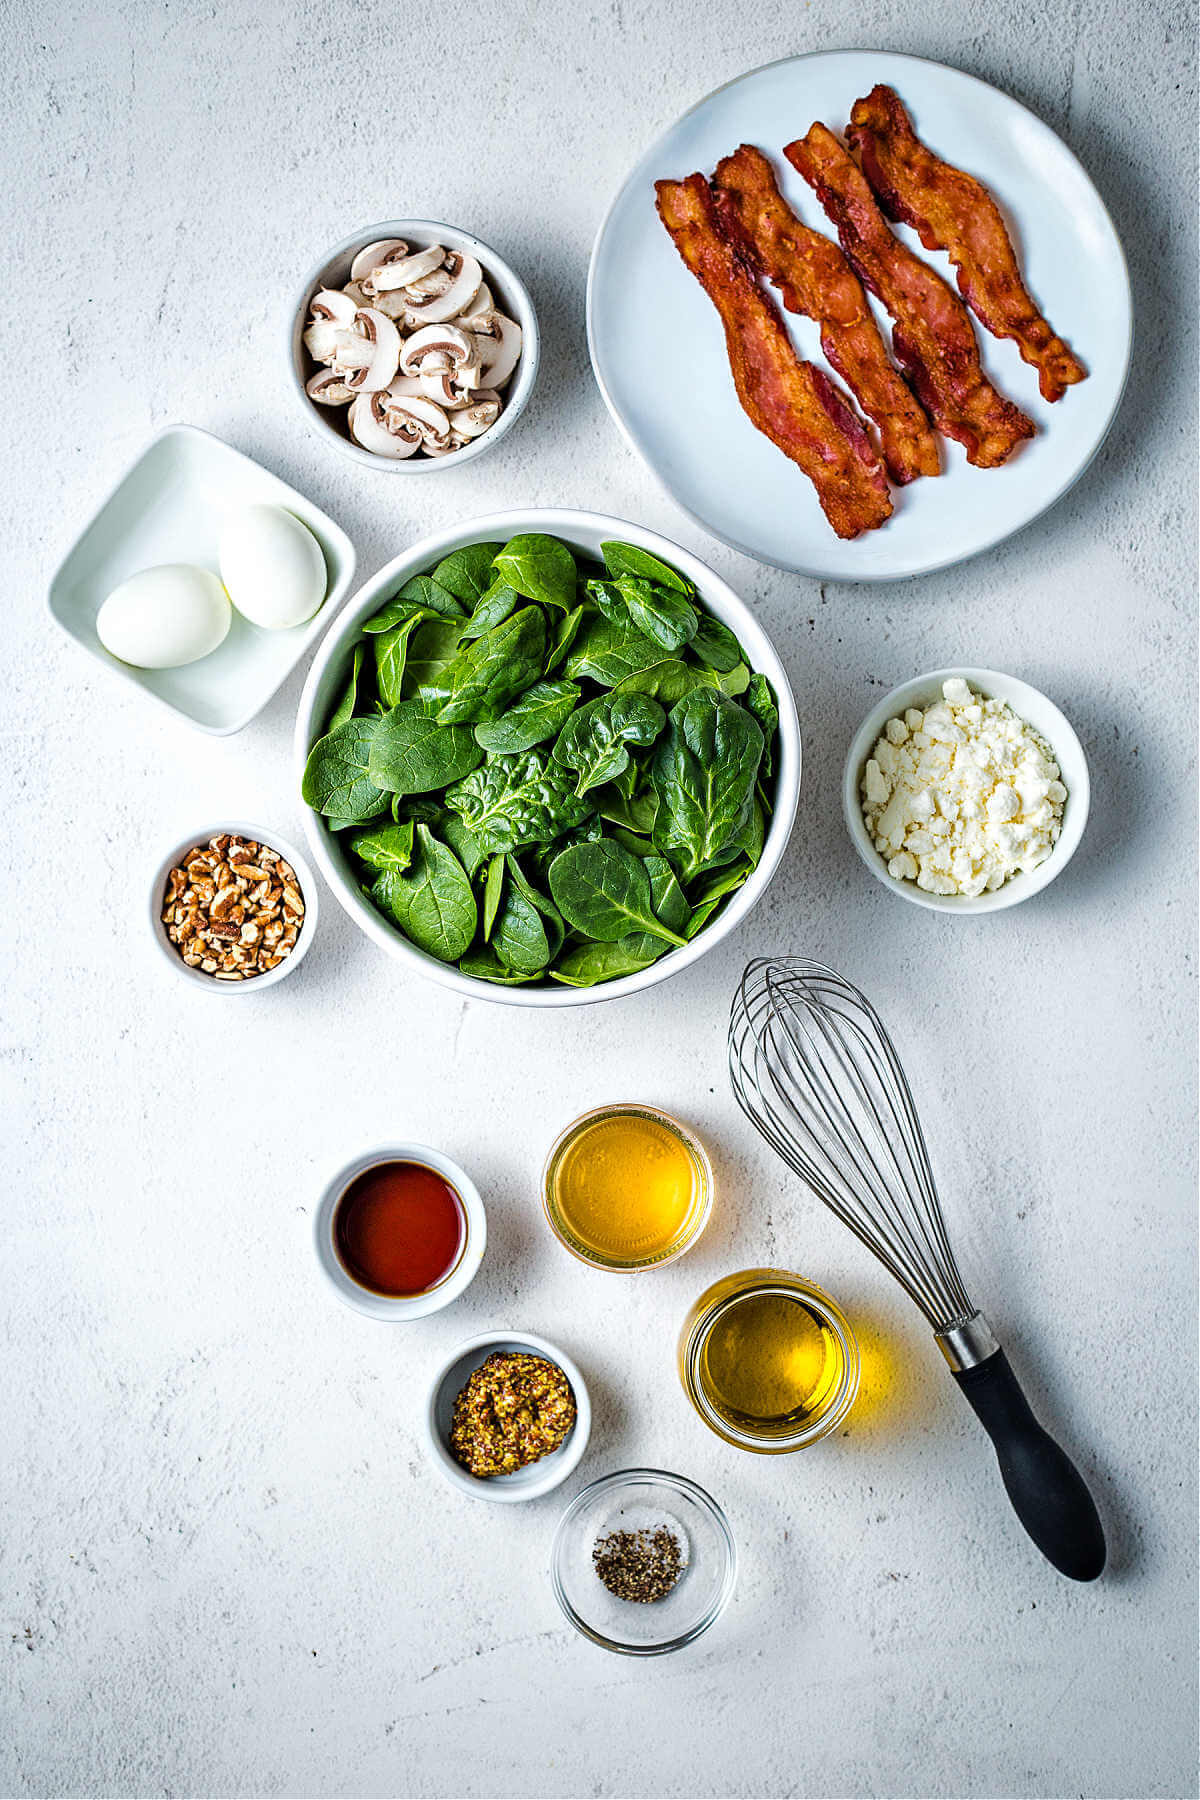 ingredients for spinach salad and dressing on a table.